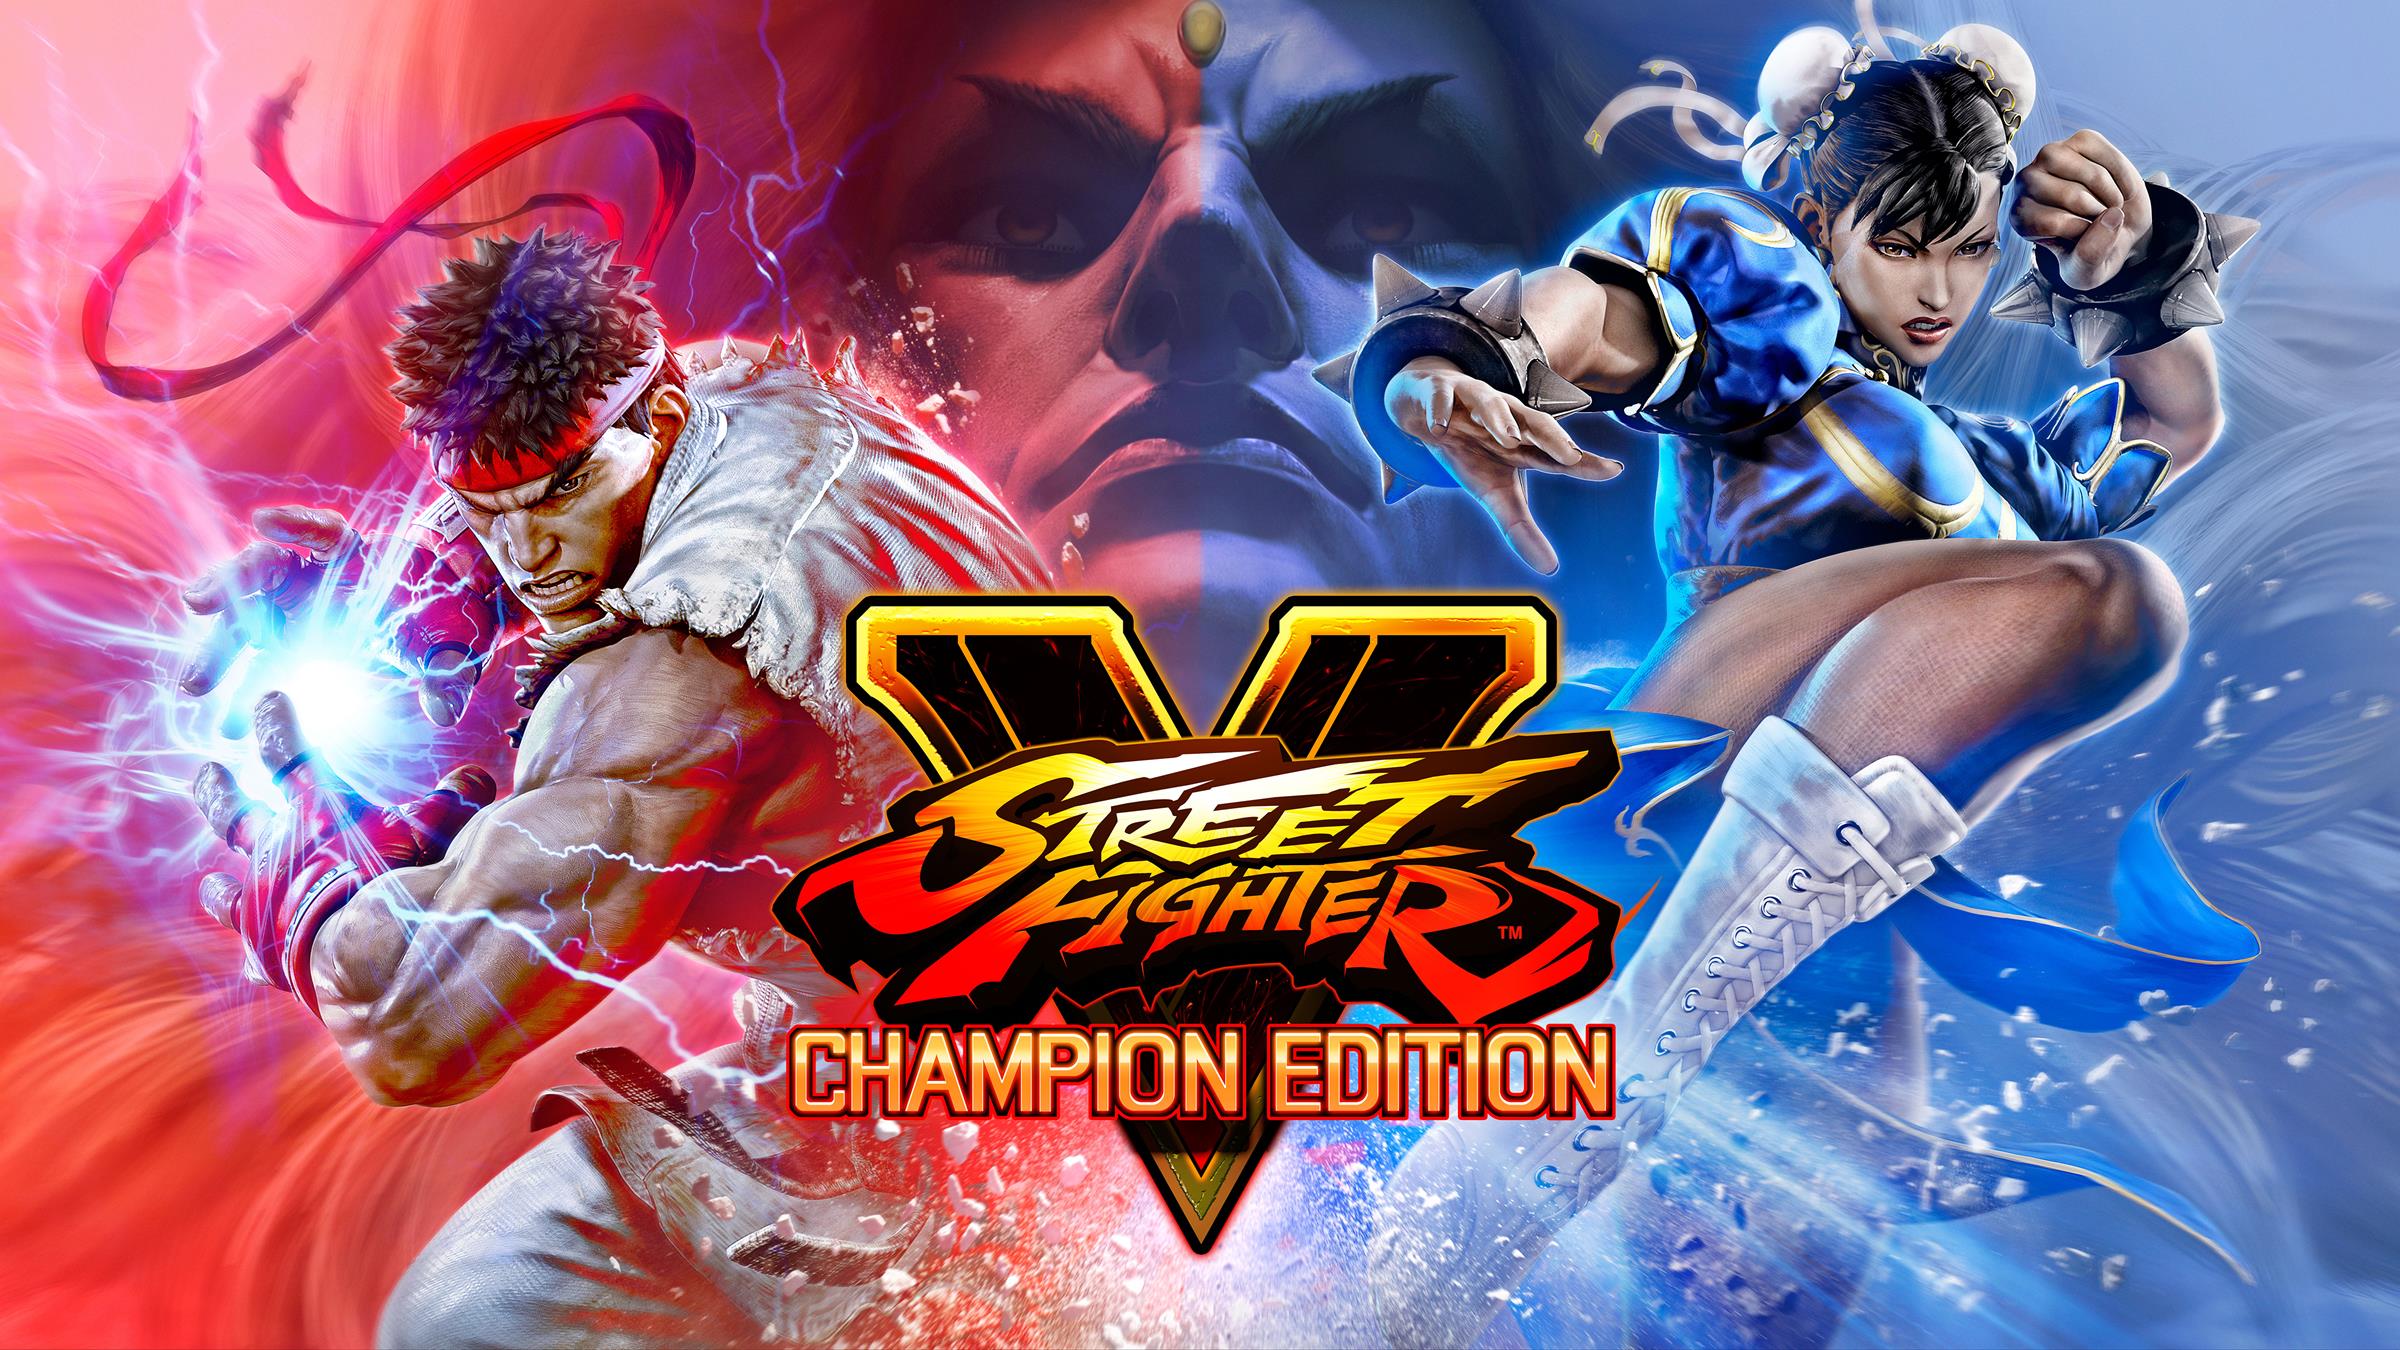 Image for Street Fighter 5: Champion Edition includes all characters, stages and costumes for $30